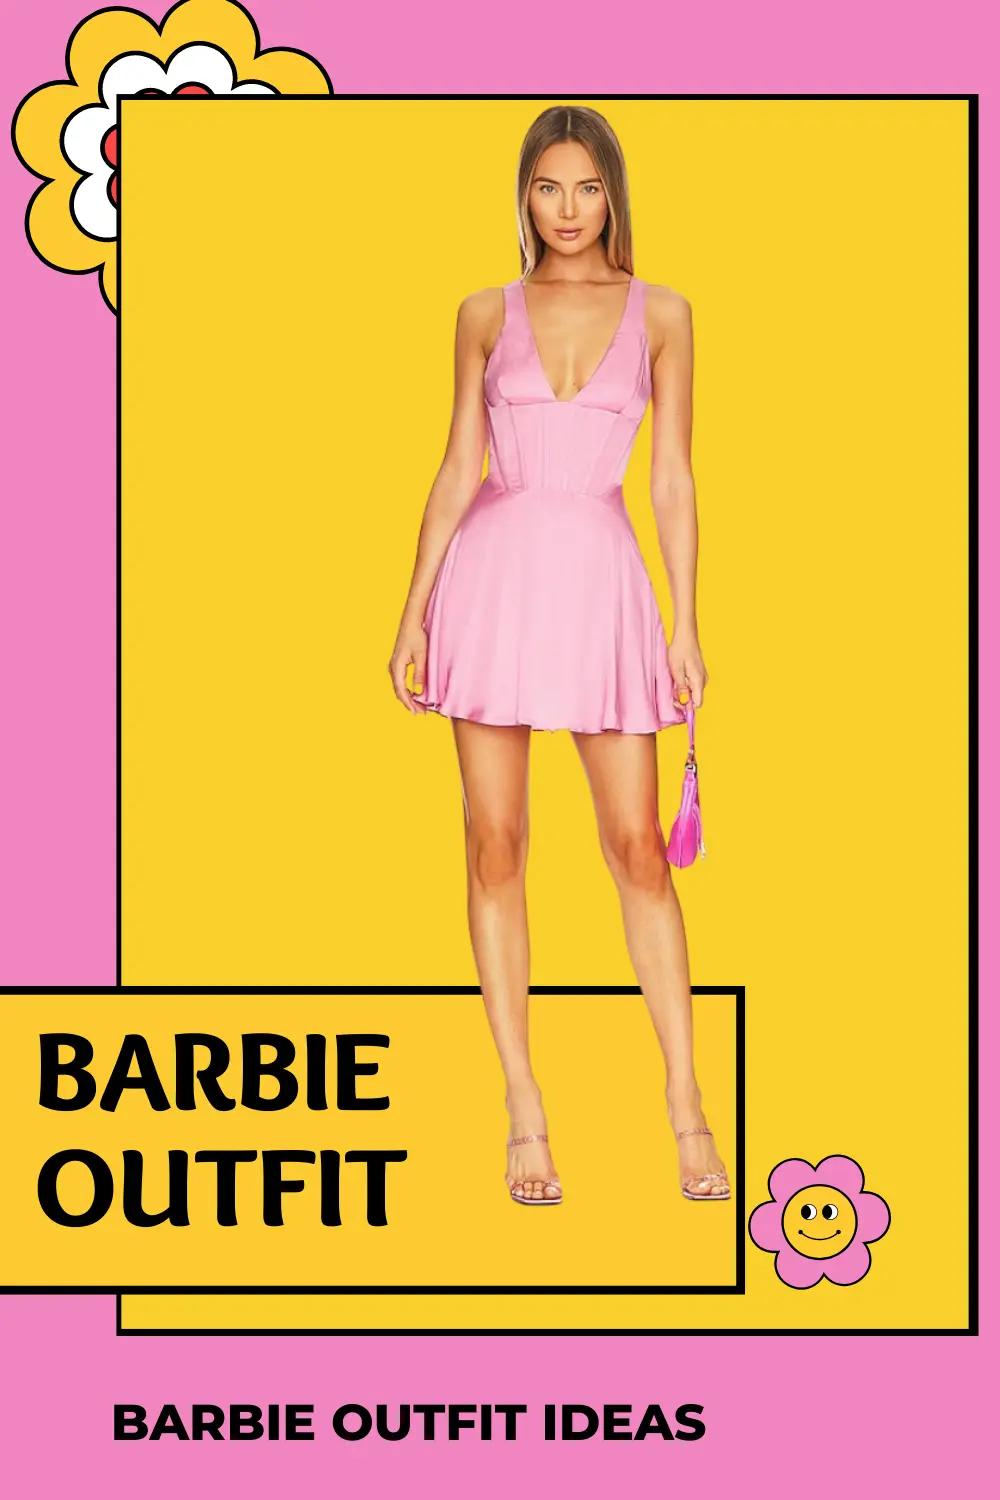 Barbie Outfit with Pink Dress